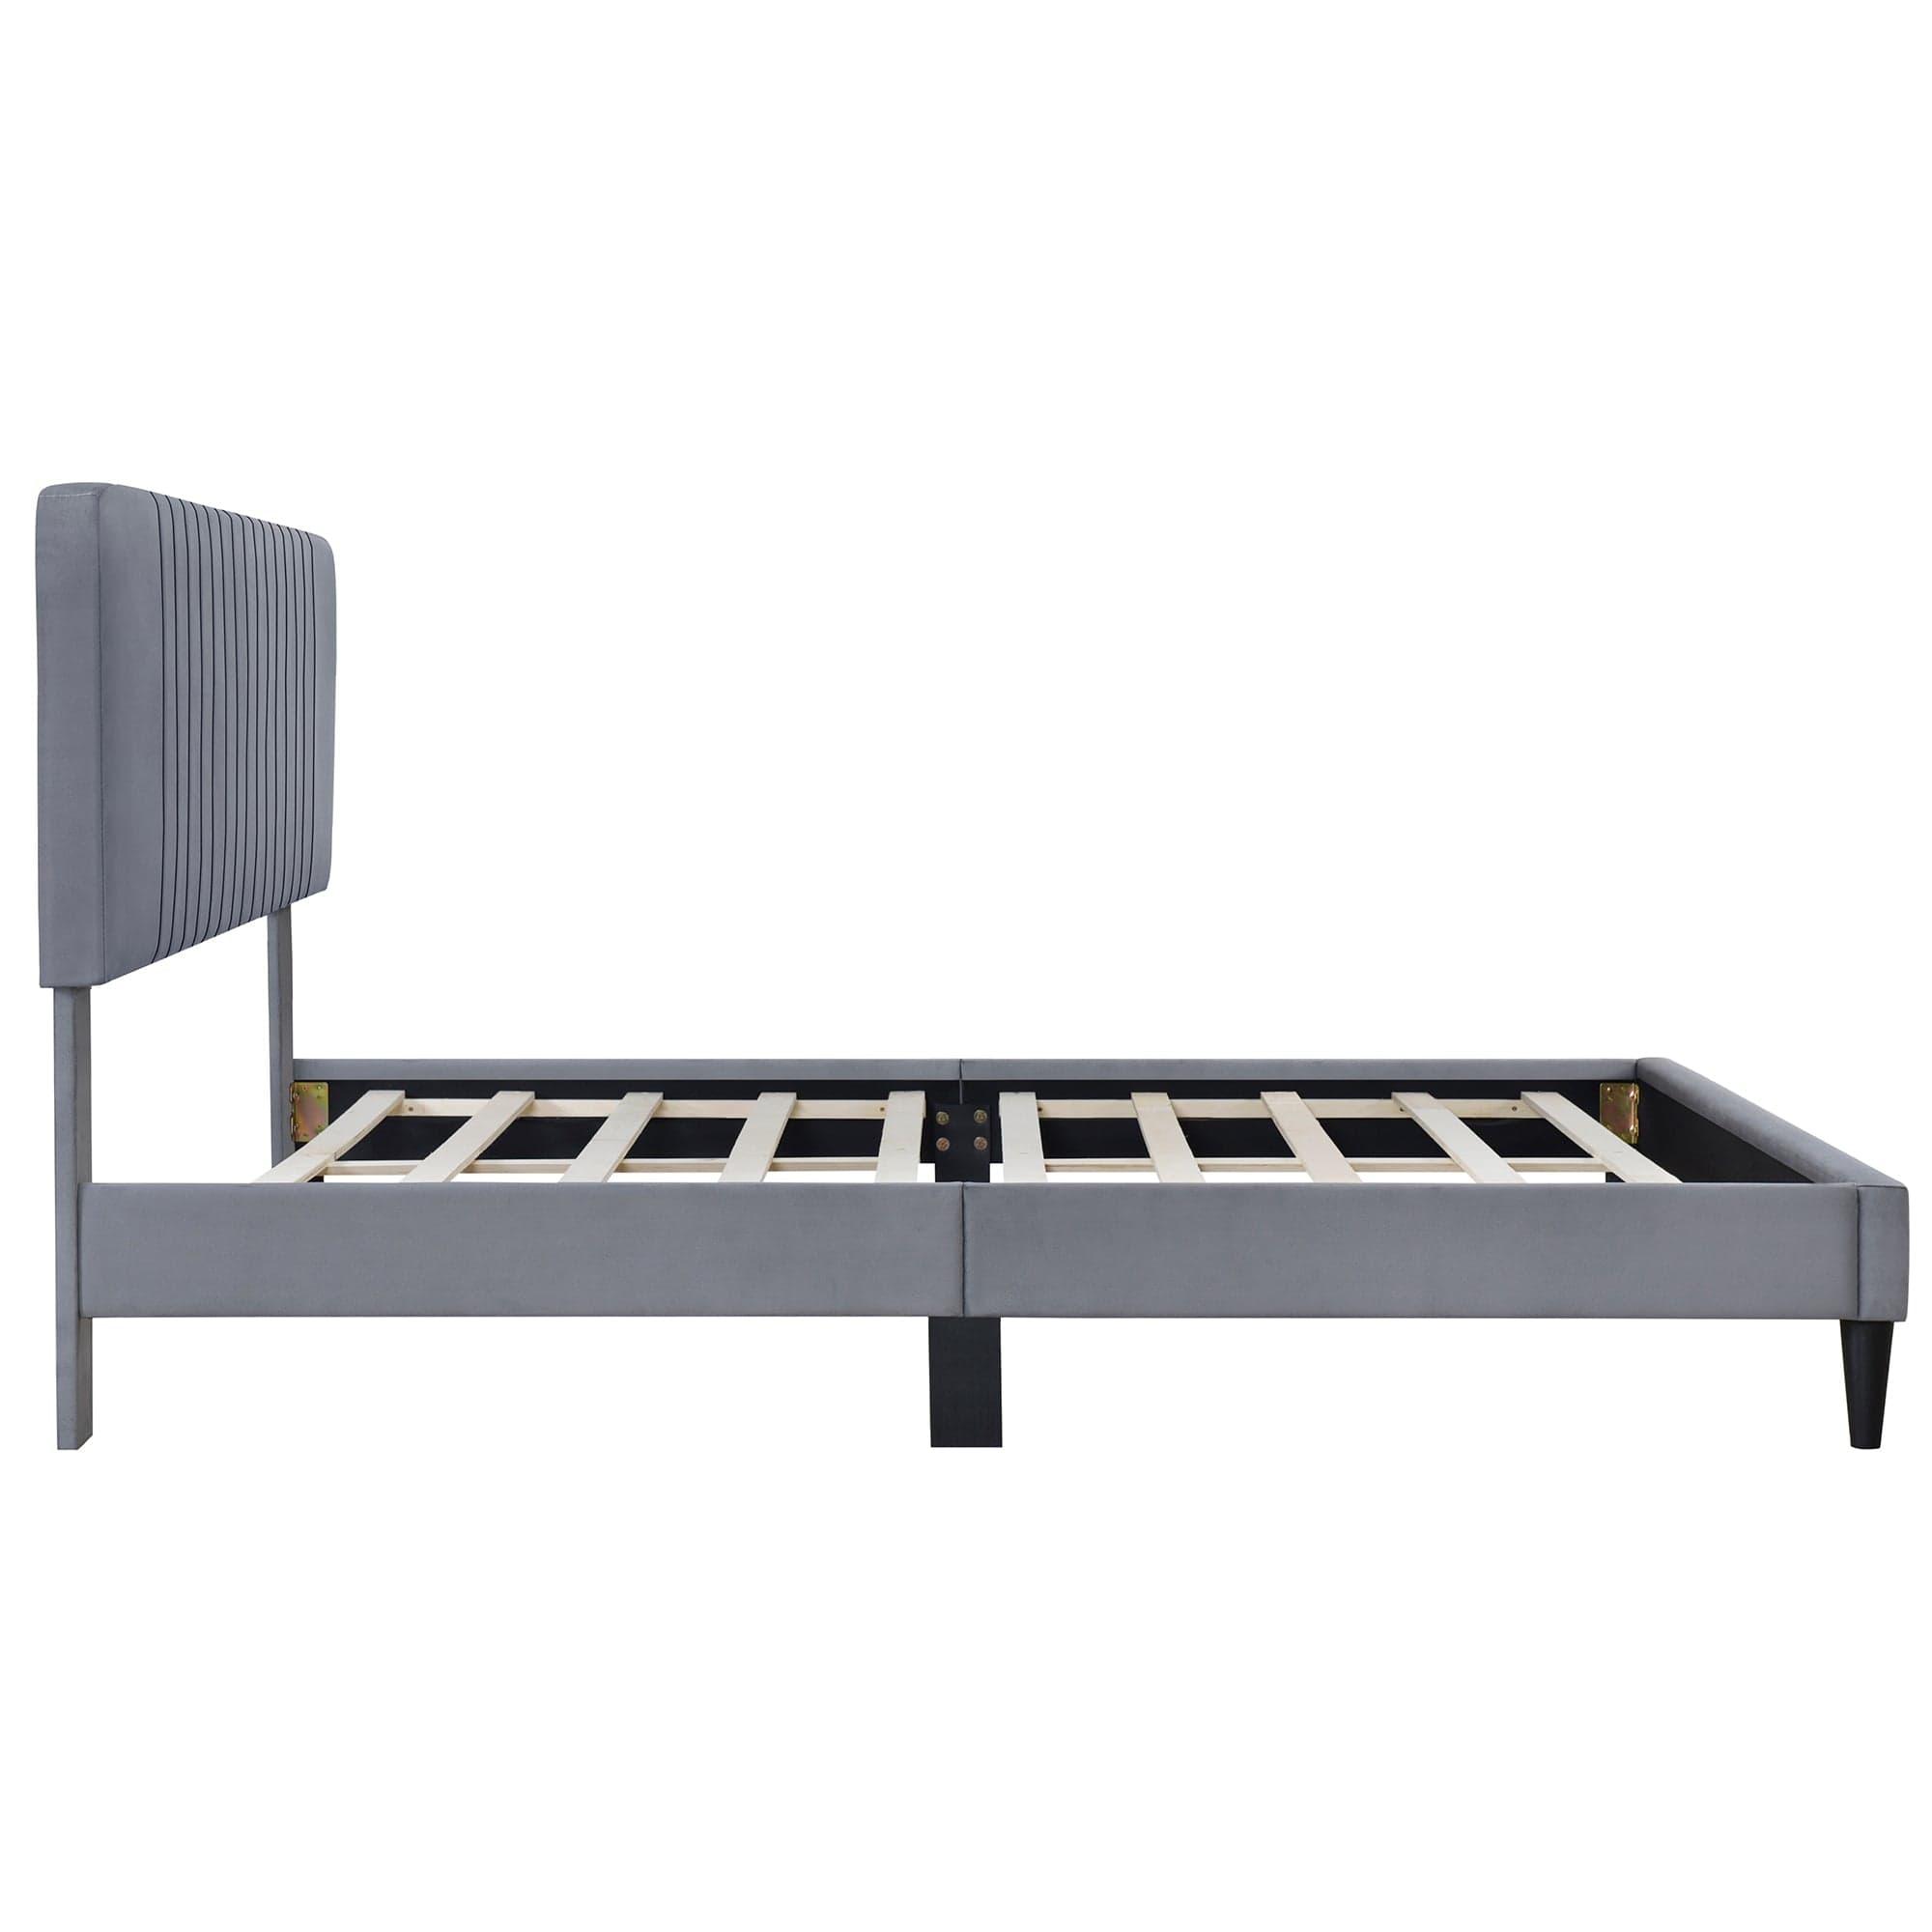 Shop 4-Pieces Bedroom Sets Queen Size Upholstered Platform Bed with Two Nightstands and Storage Bench-Gray Mademoiselle Home Decor